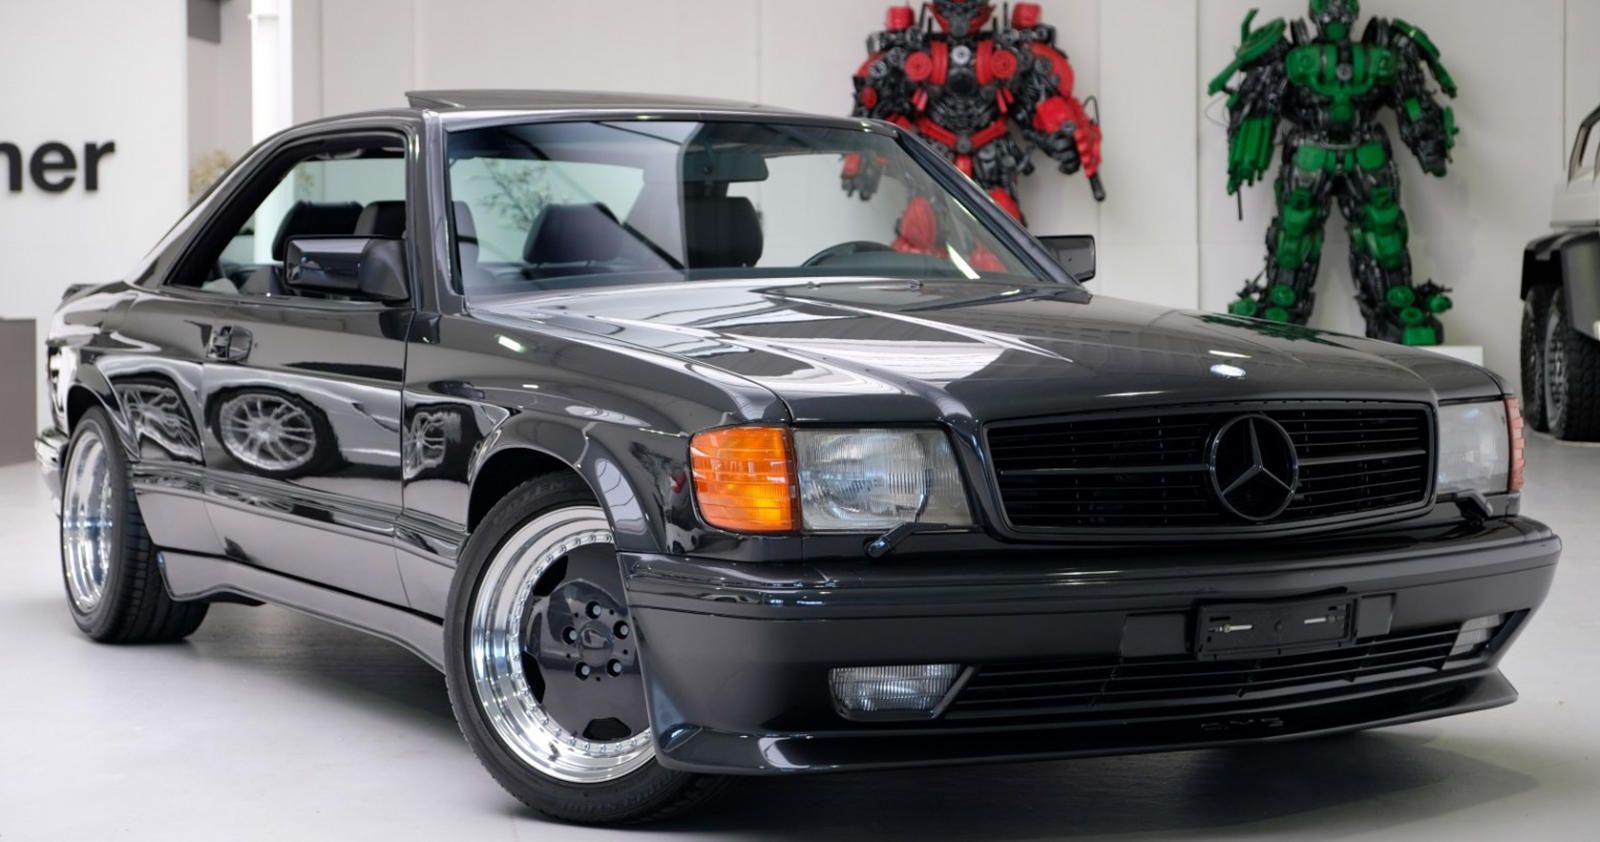 Check Out This Custom 19 Mercedes 560 Sec Amg 6 0 Widebody